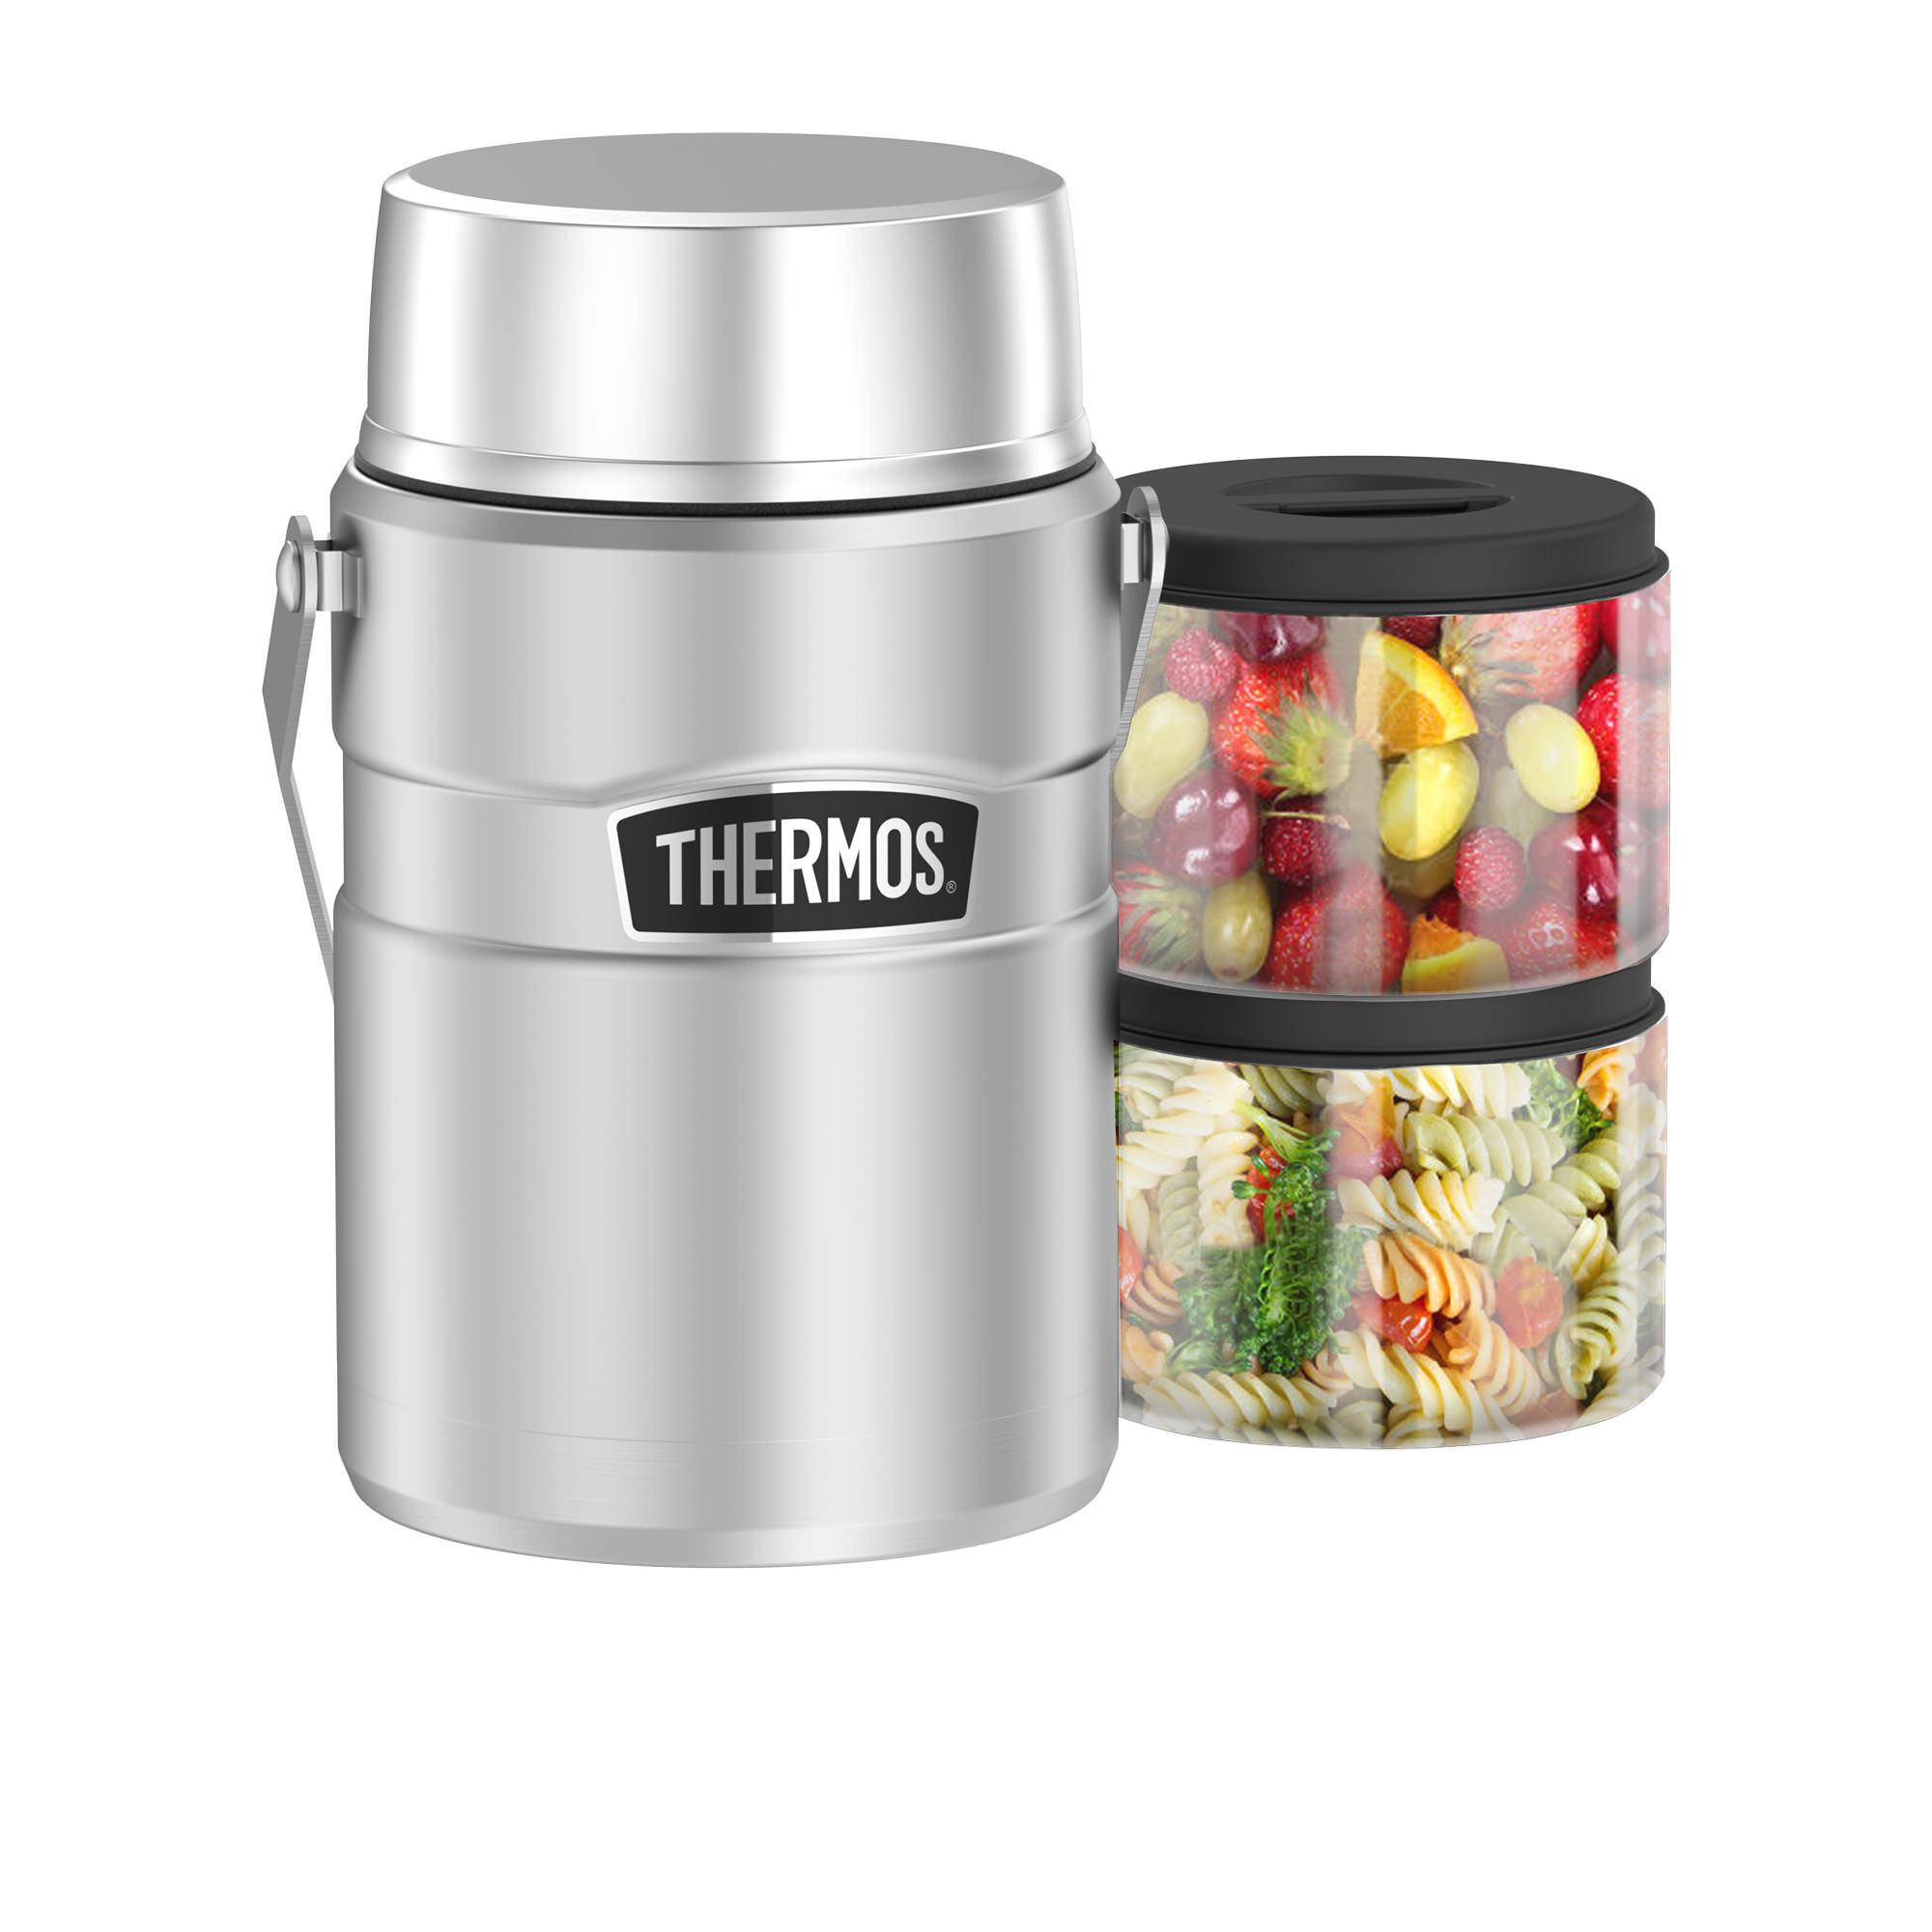 Thermos Stainless King Big Boss Food Jar 1.39L Stainless Steel Image 3